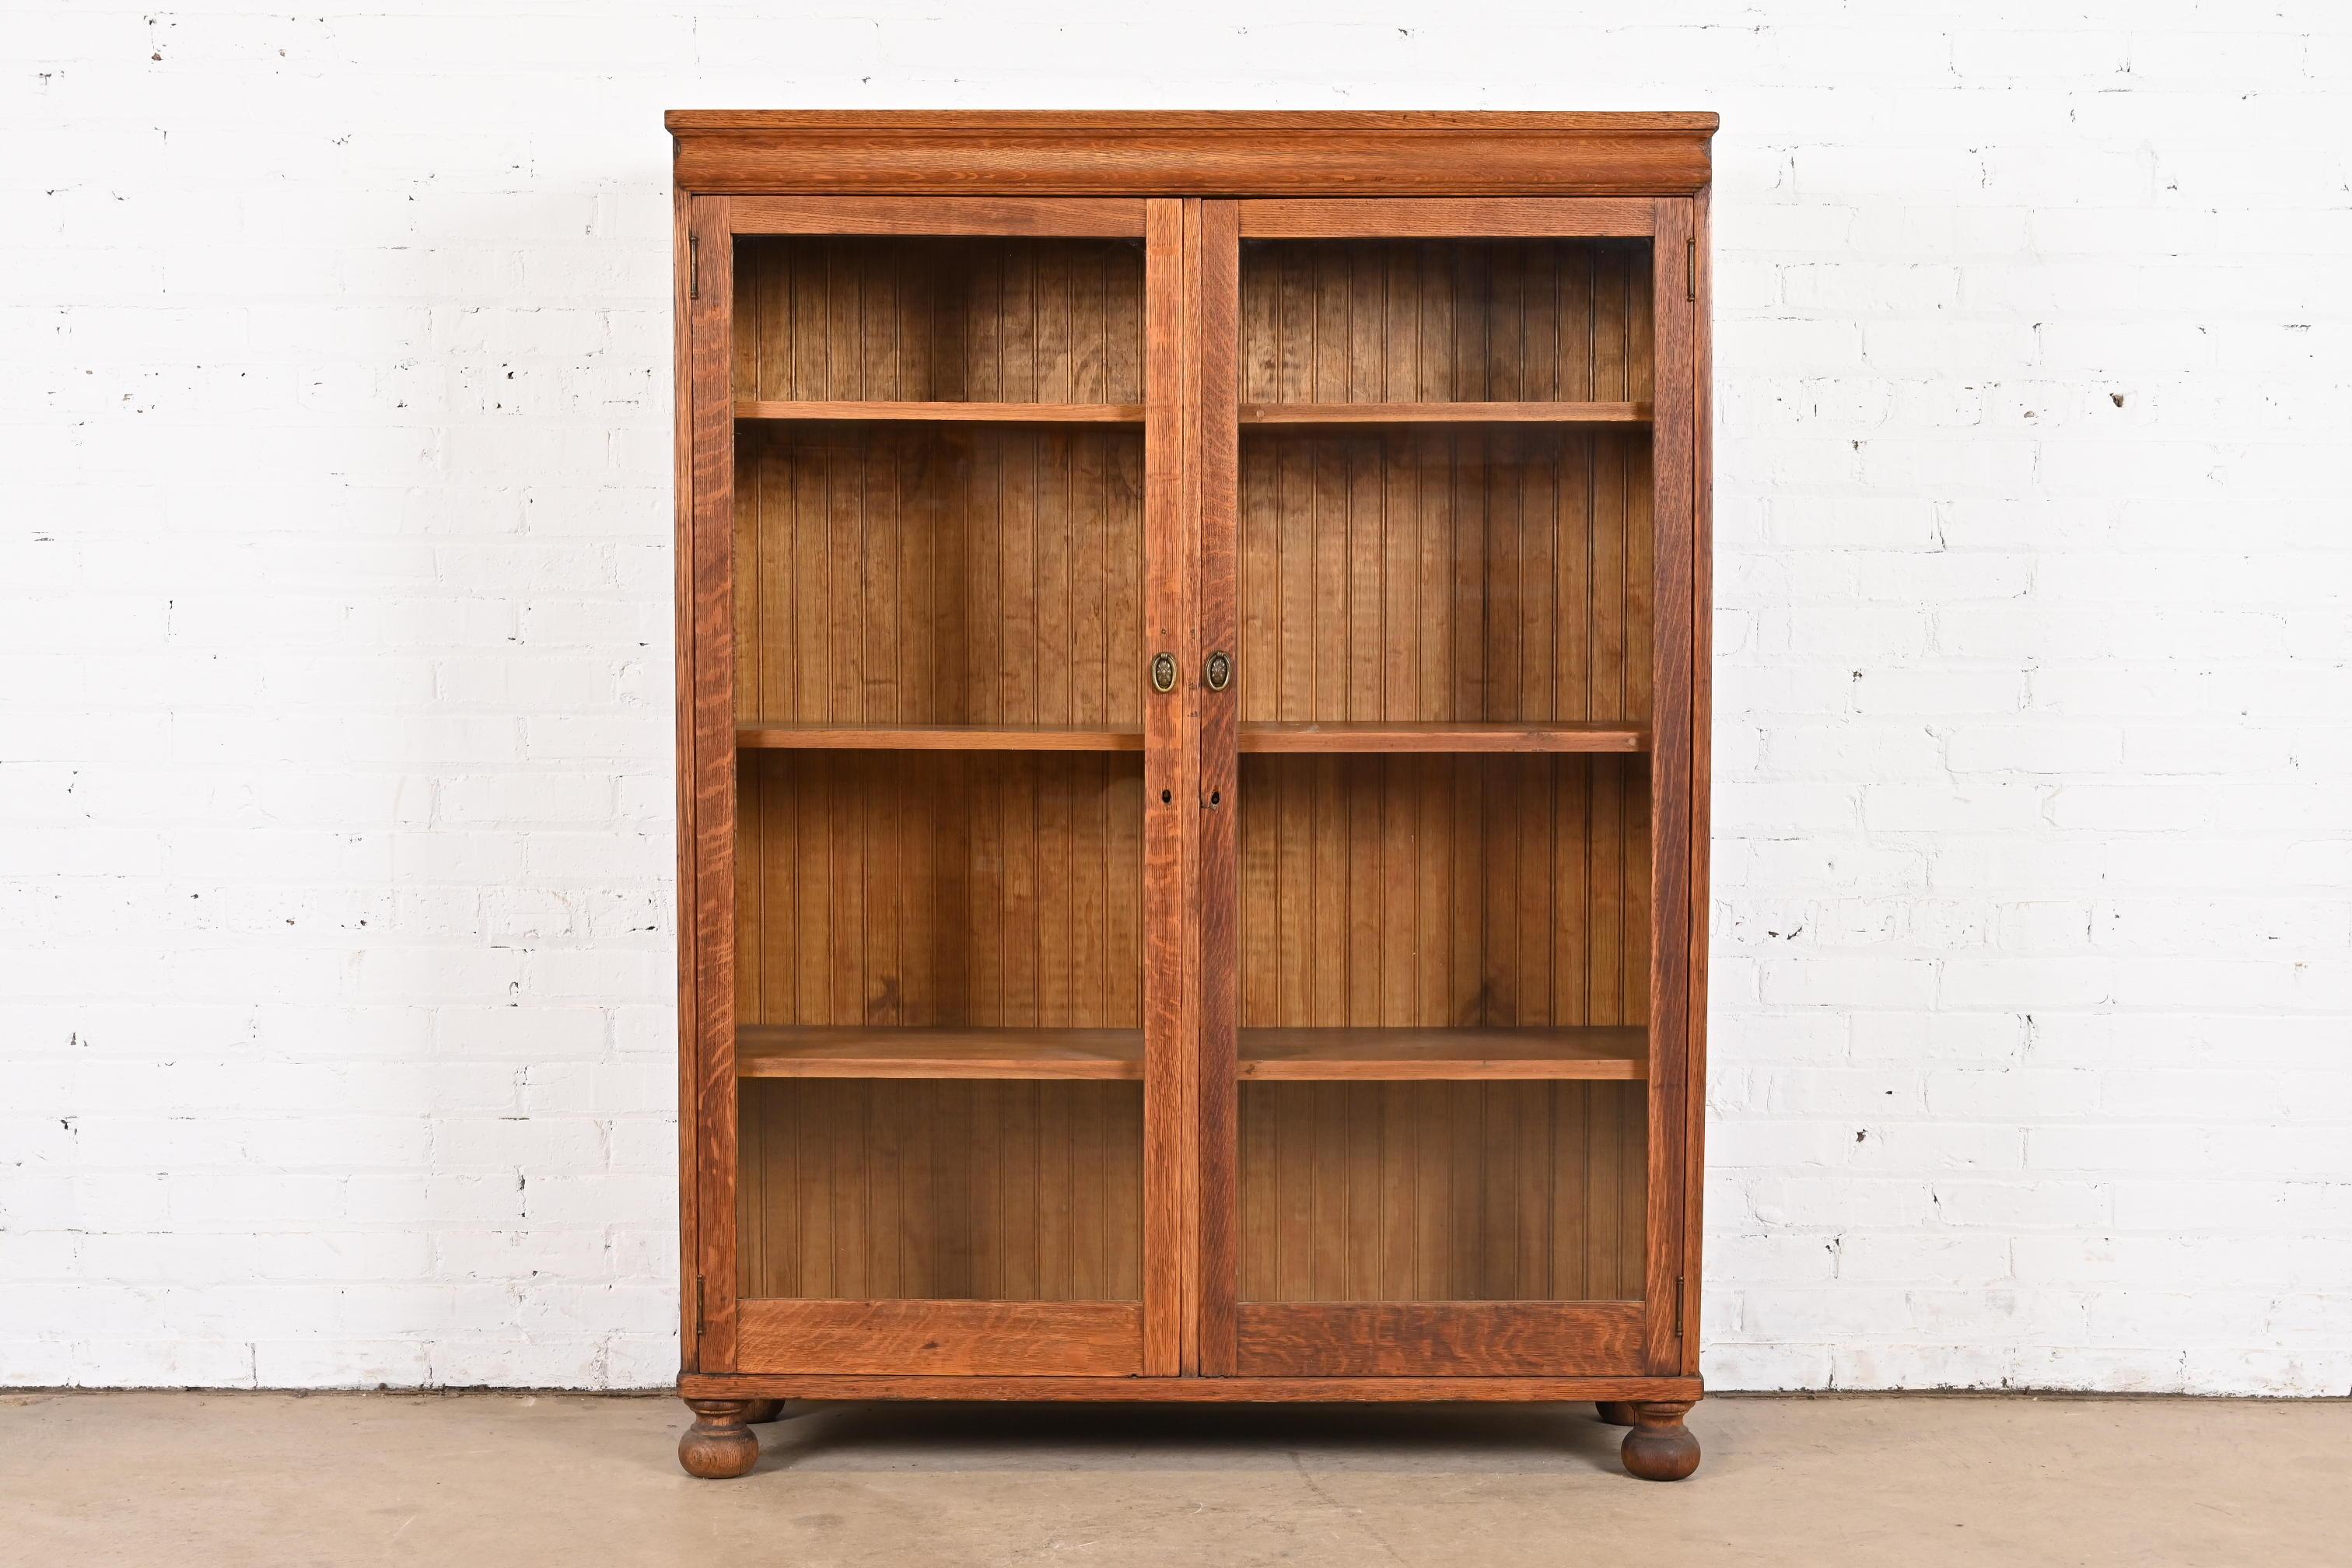 A beautiful antique Arts & Crafts double bookcase cabinet

In the manner of Stickley Brothers

USA, Circa 1900

Carved oak, with glass front doors and brass hardware.

Measures: 44.25